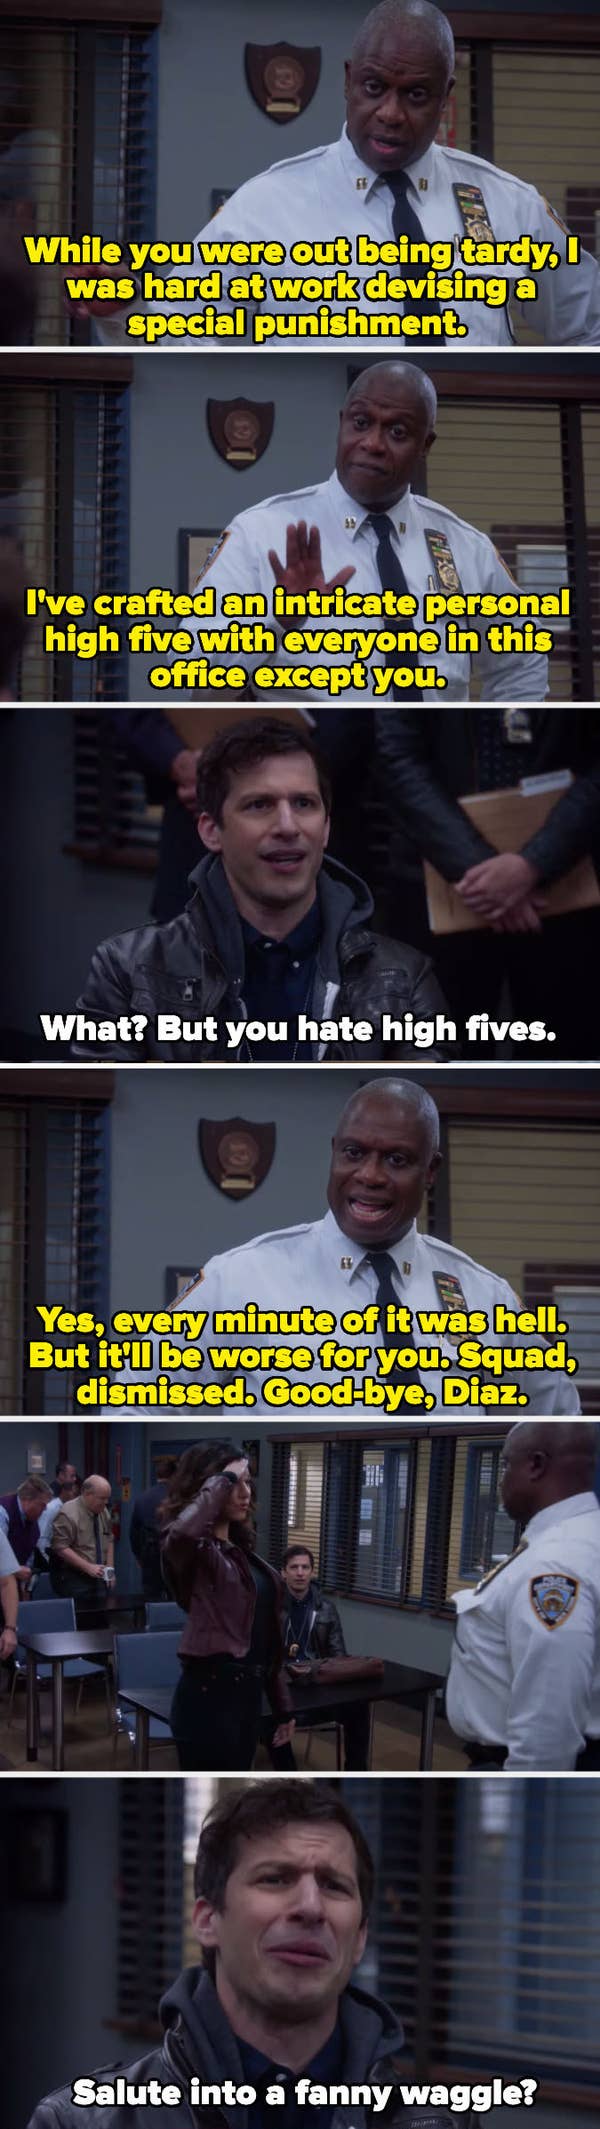 Brooklyn Nine-Nine: 23 Best Cold Opens That Are Hilarious